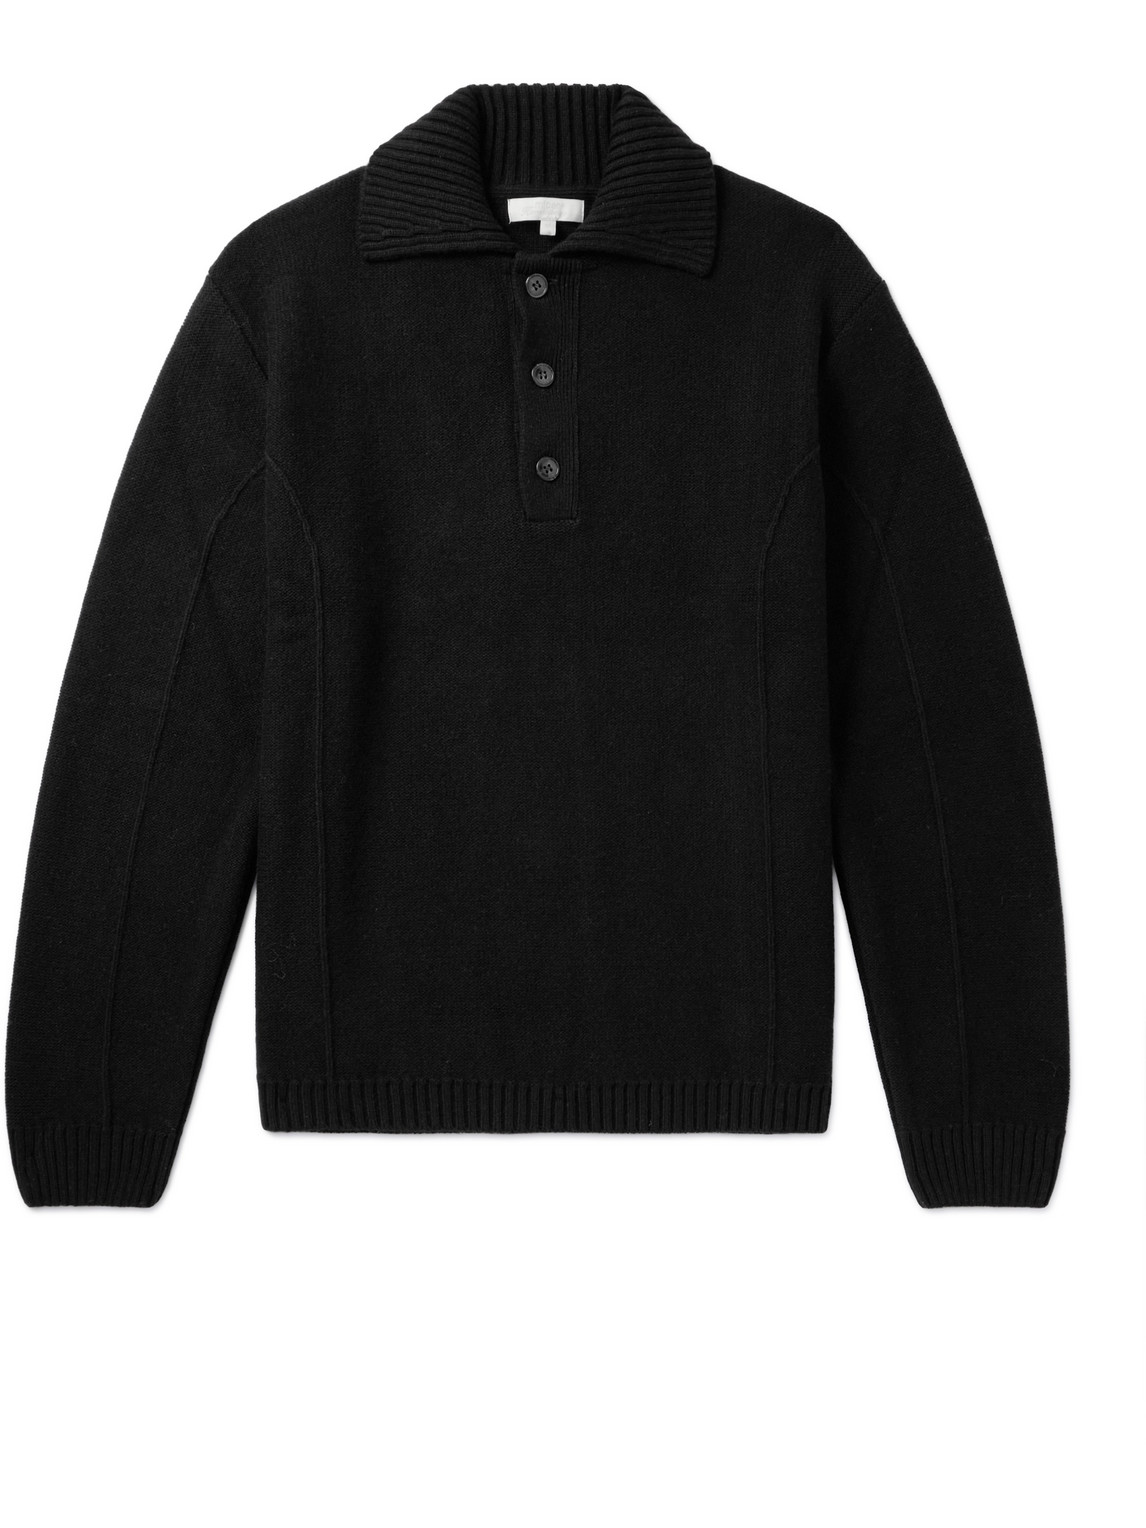 Mfpen Black Company Polo In Black Recycled Wool